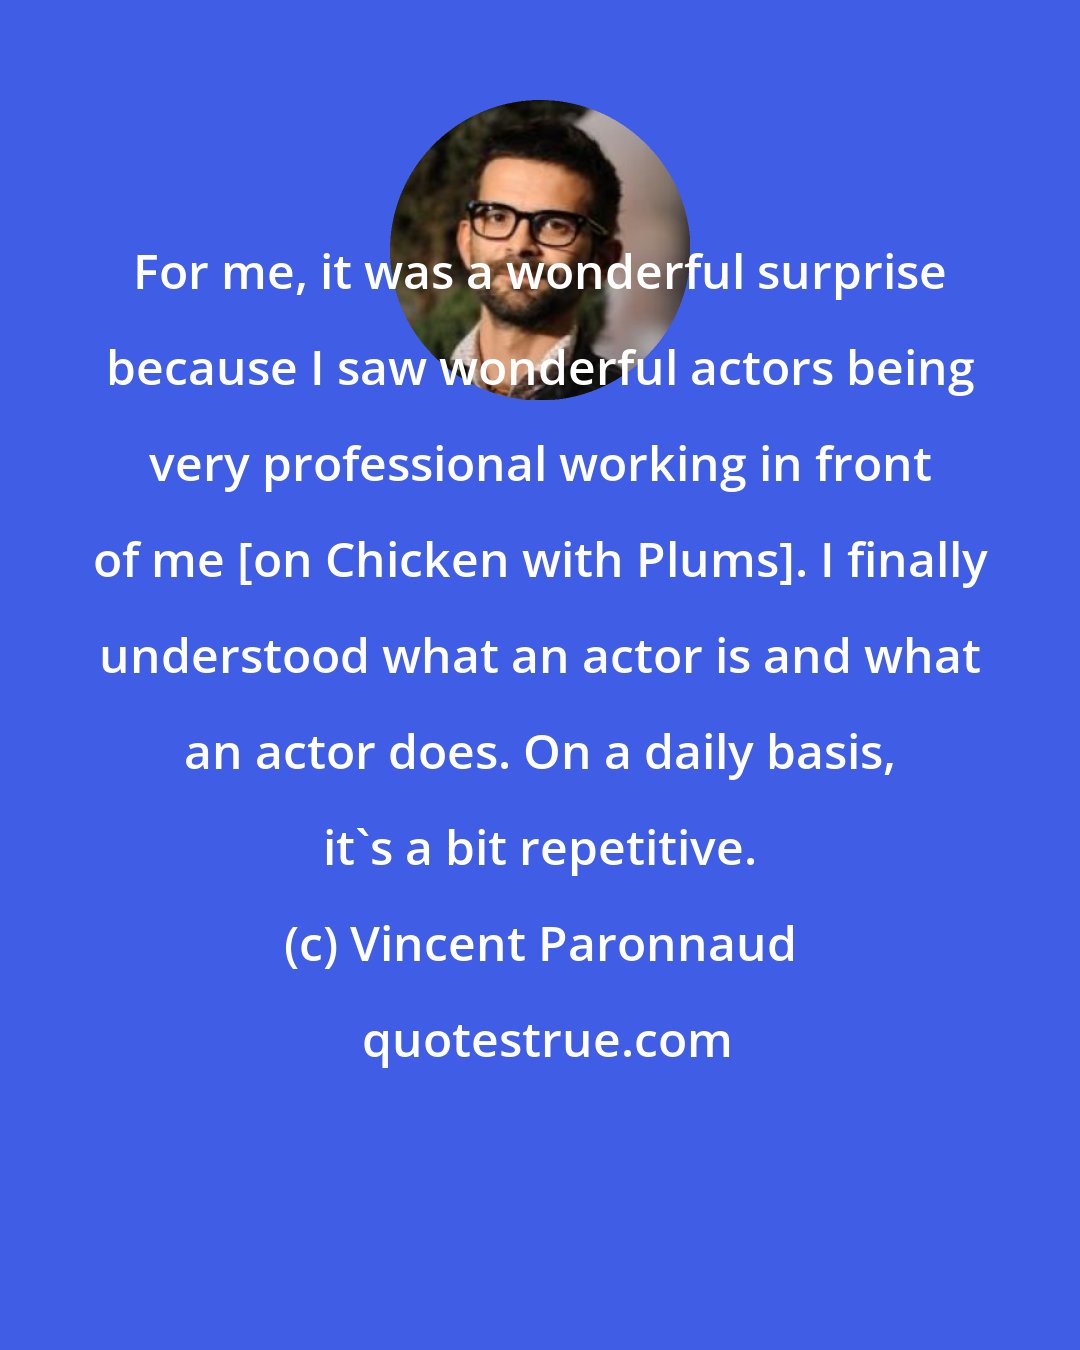 Vincent Paronnaud: For me, it was a wonderful surprise because I saw wonderful actors being very professional working in front of me [on Chicken with Plums]. I finally understood what an actor is and what an actor does. On a daily basis, it's a bit repetitive.